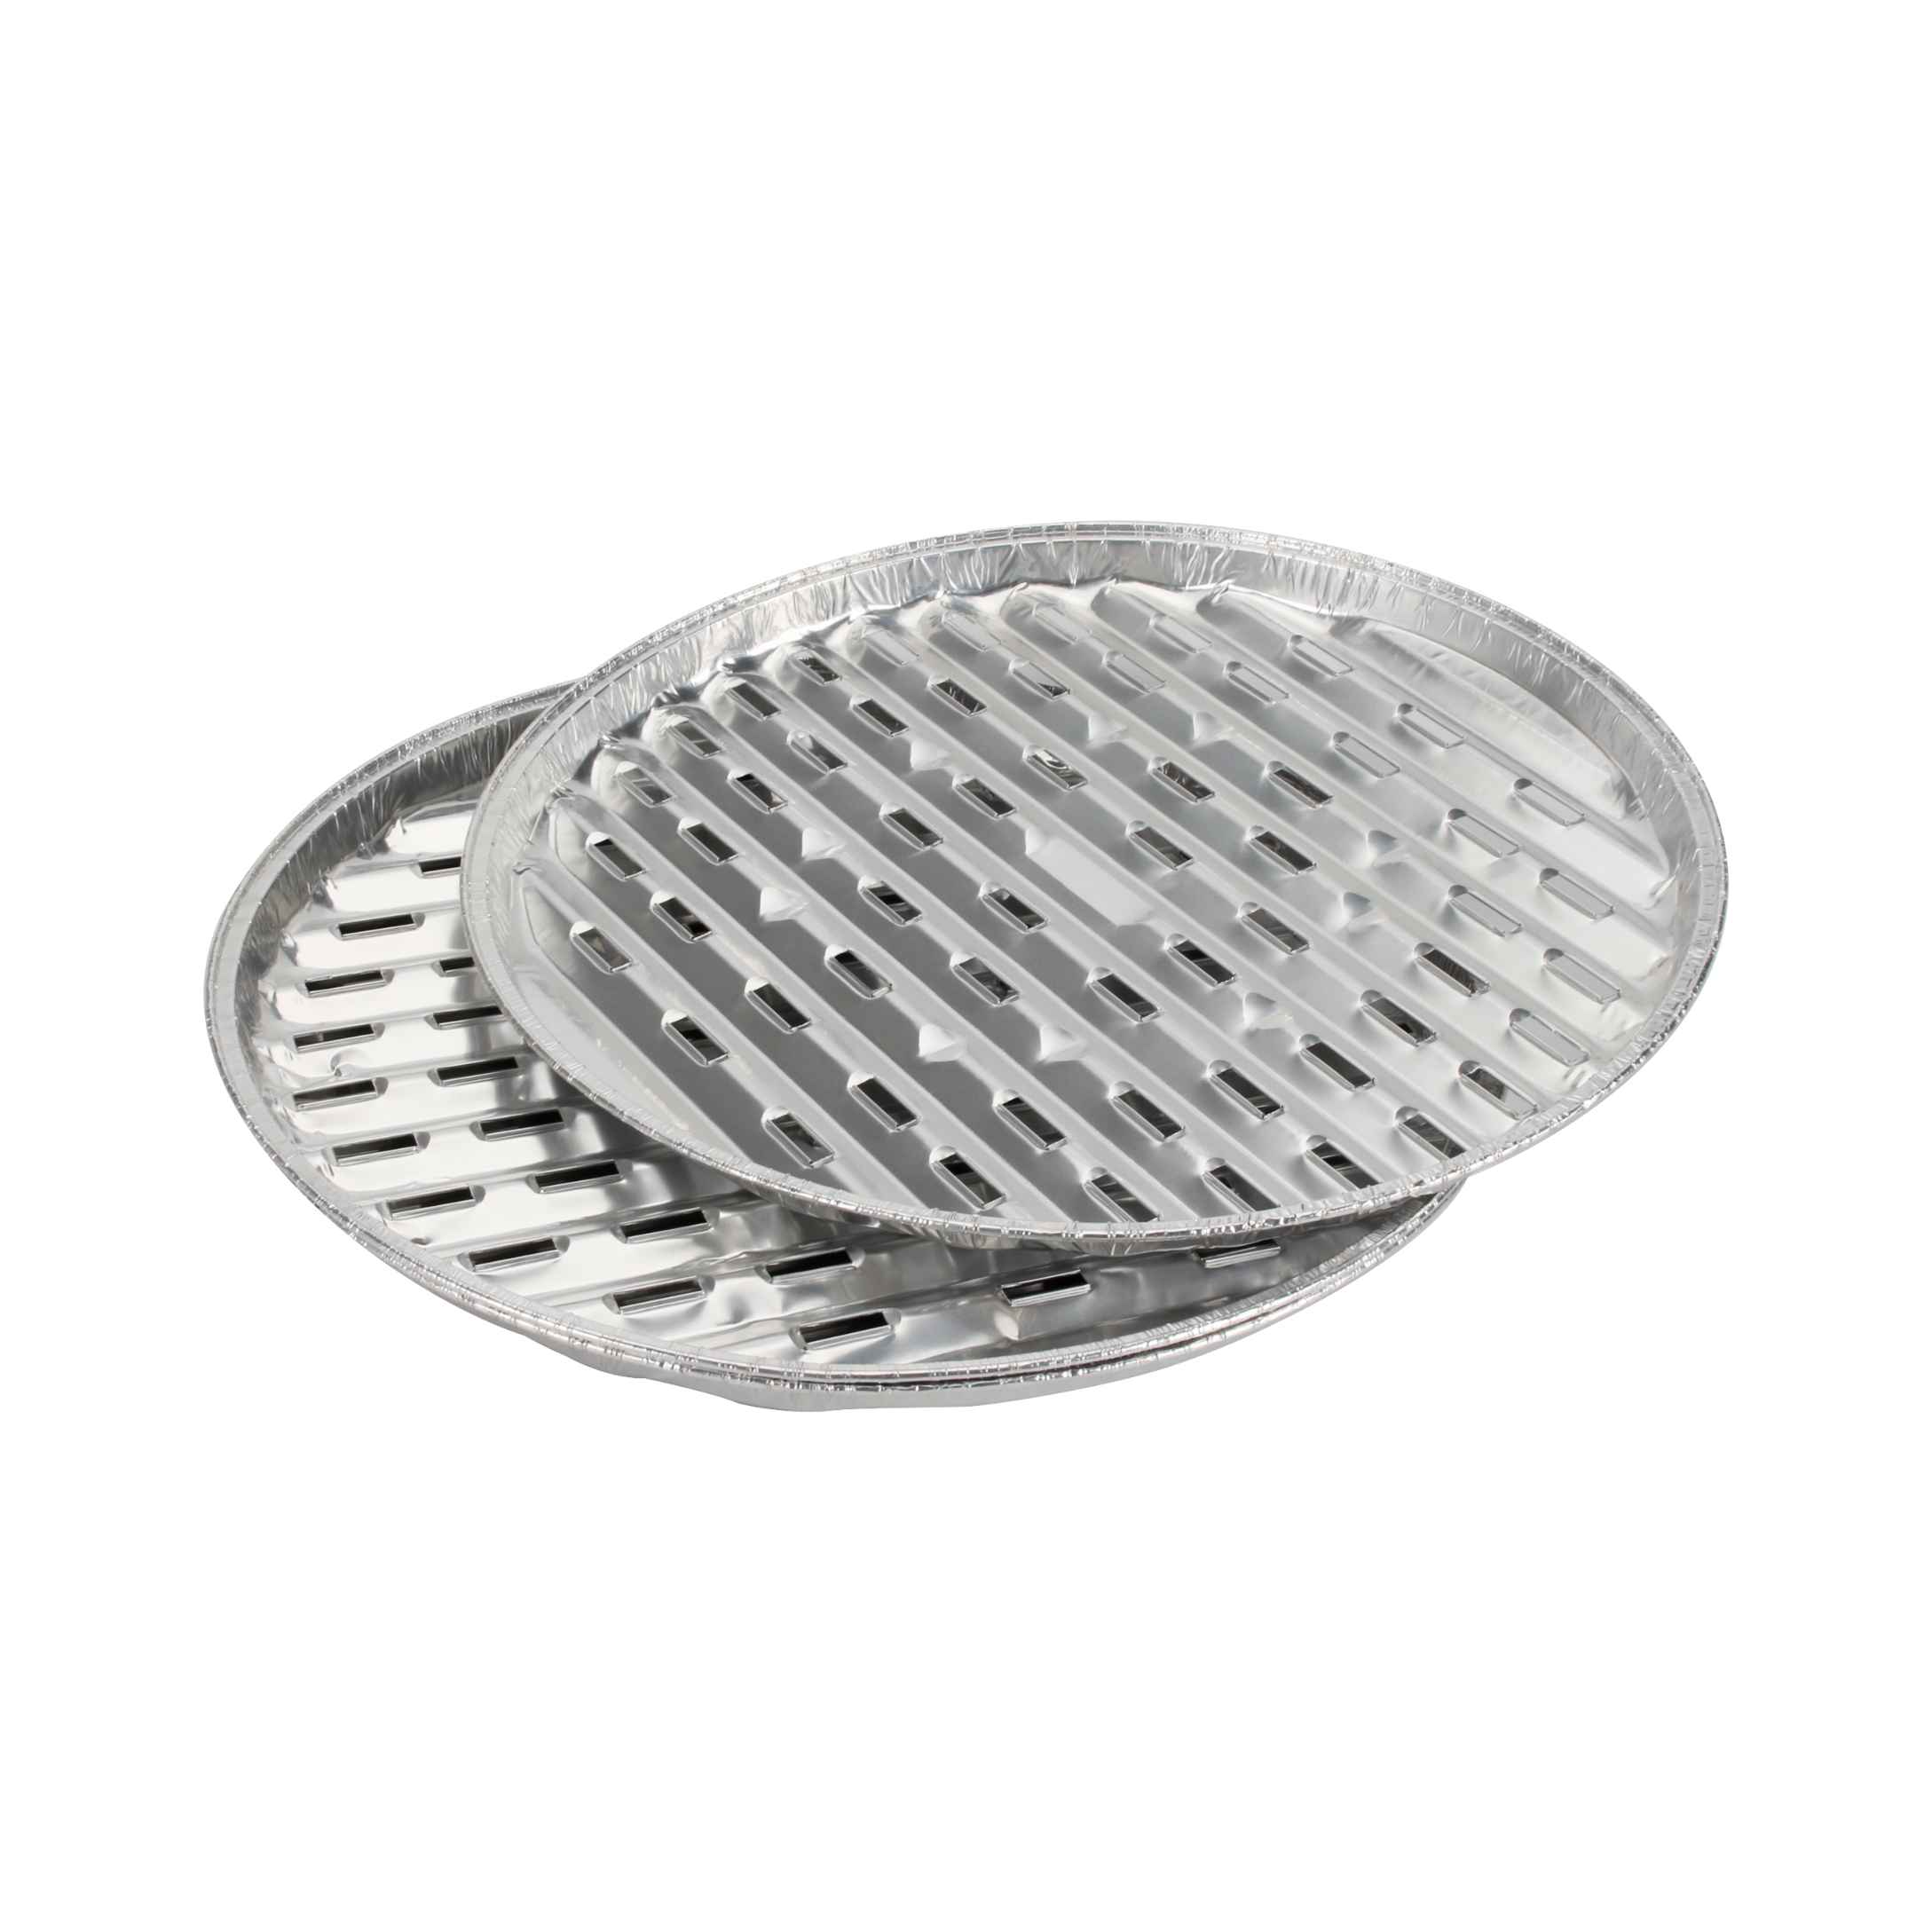 Round foil BBQ grill pan